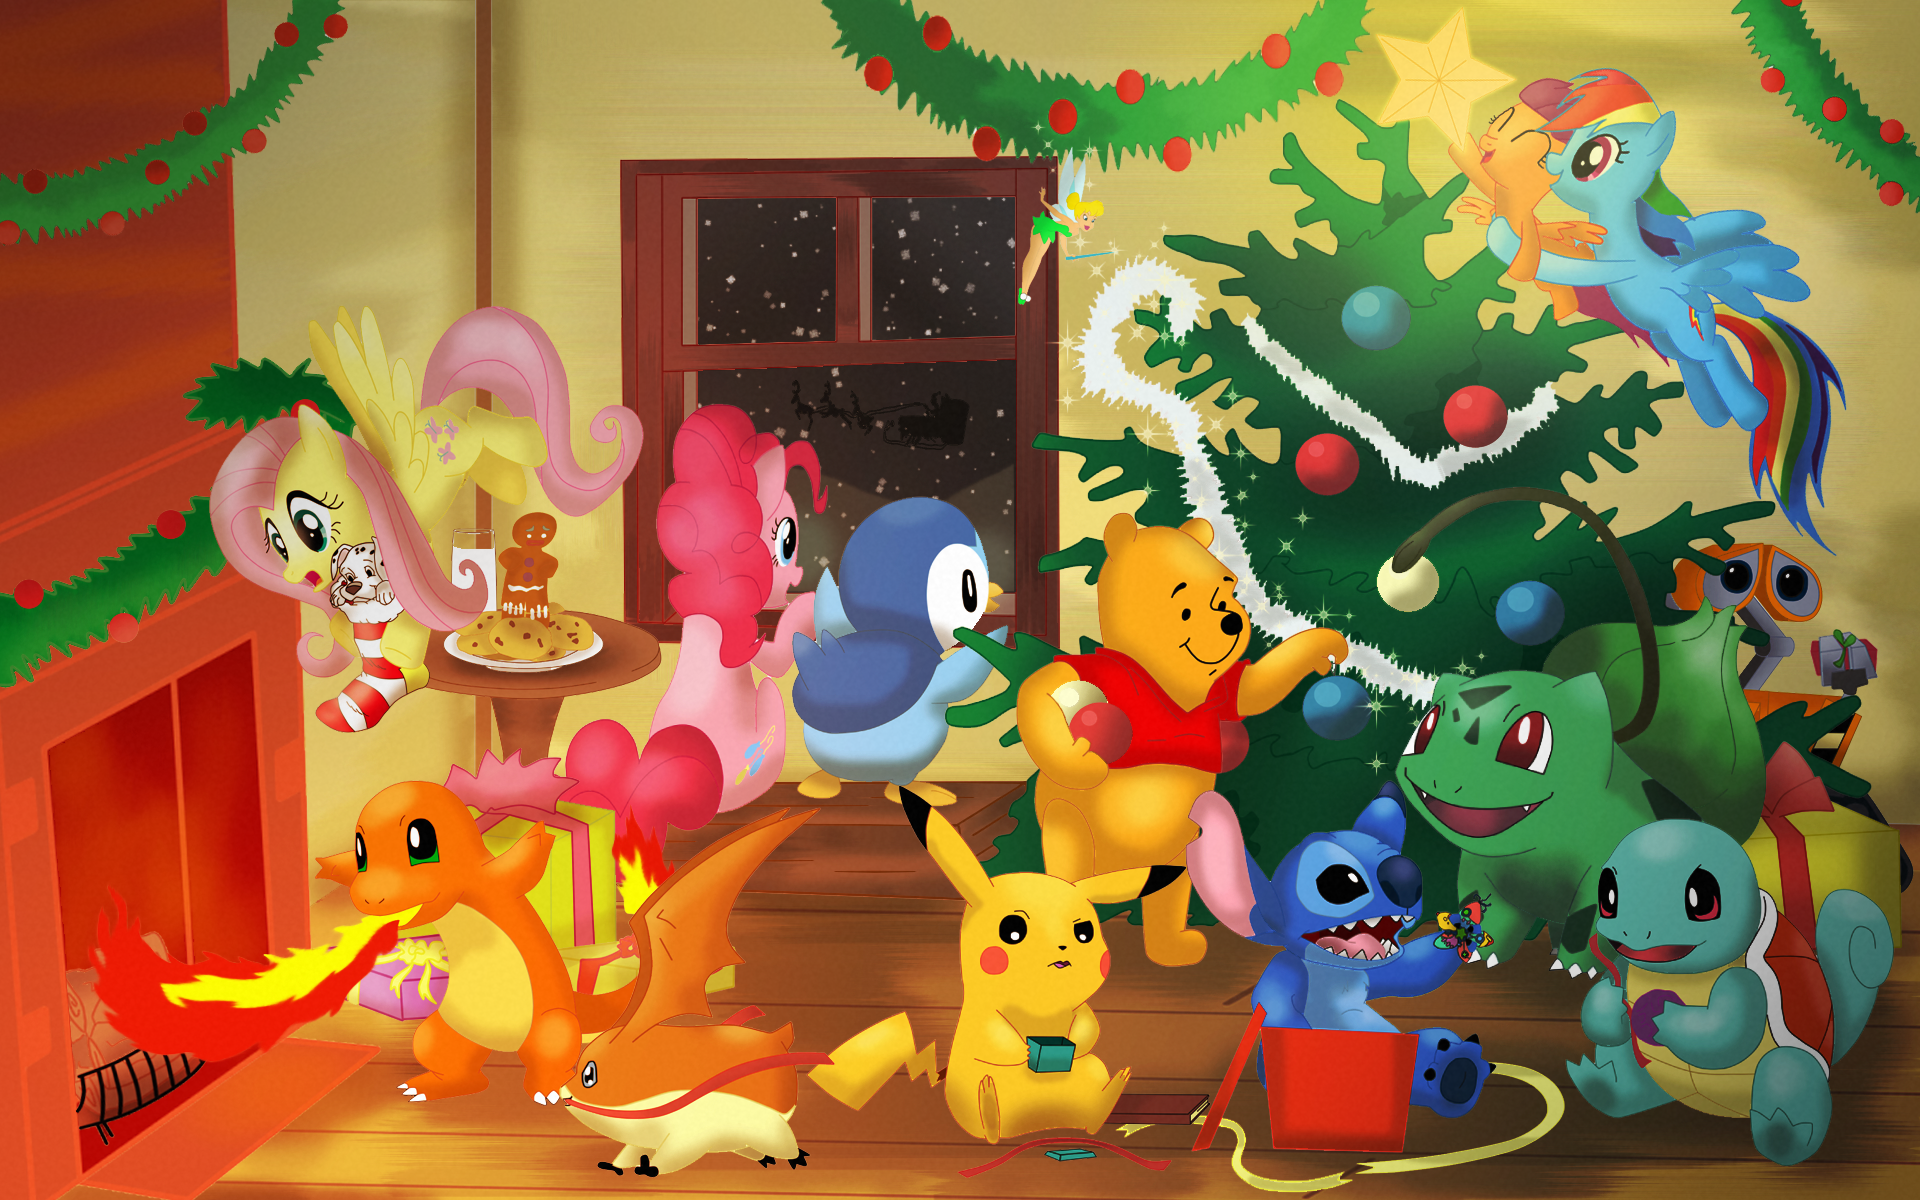 http://fc00.deviantart.net/fs71/f/2013/349/7/5/have_yourself_a_merry_little_crossover_by_clophil-d6y0l0b.png